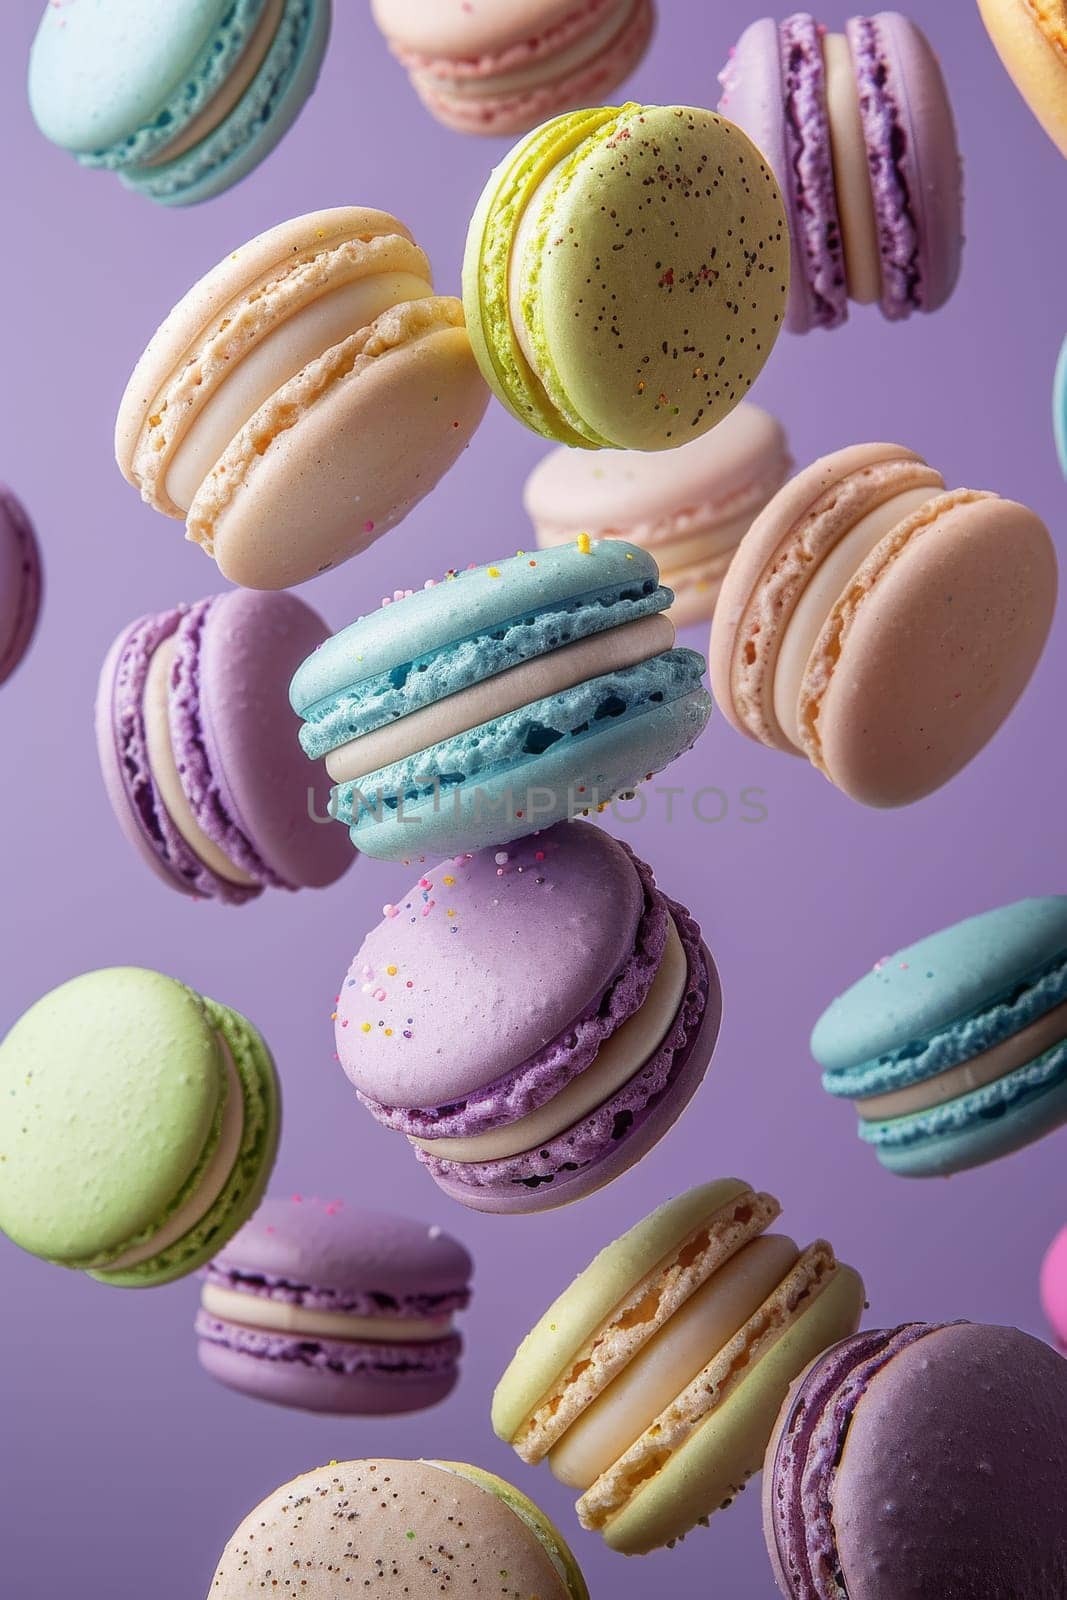 A colorful assortment of macarons are flying through the air, with some of them landing on a blue background. The macarons come in a variety of colors and flavors, including blueberry, raspberry